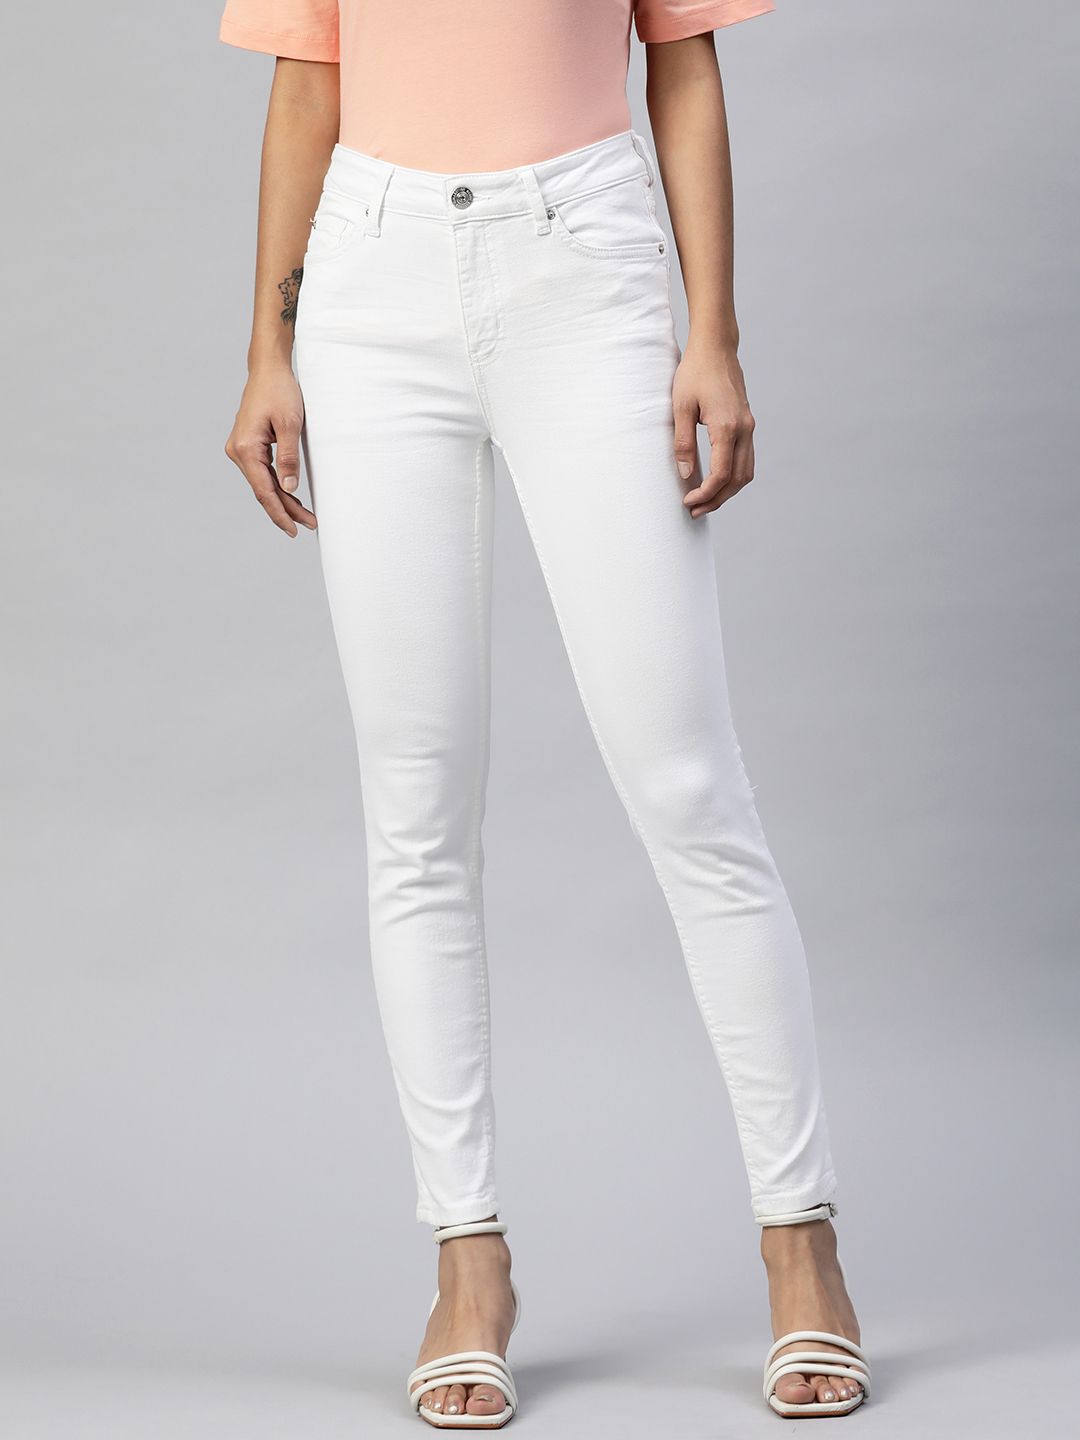 Marks & Spencer Women White Skinny Fit Jeans Price in India